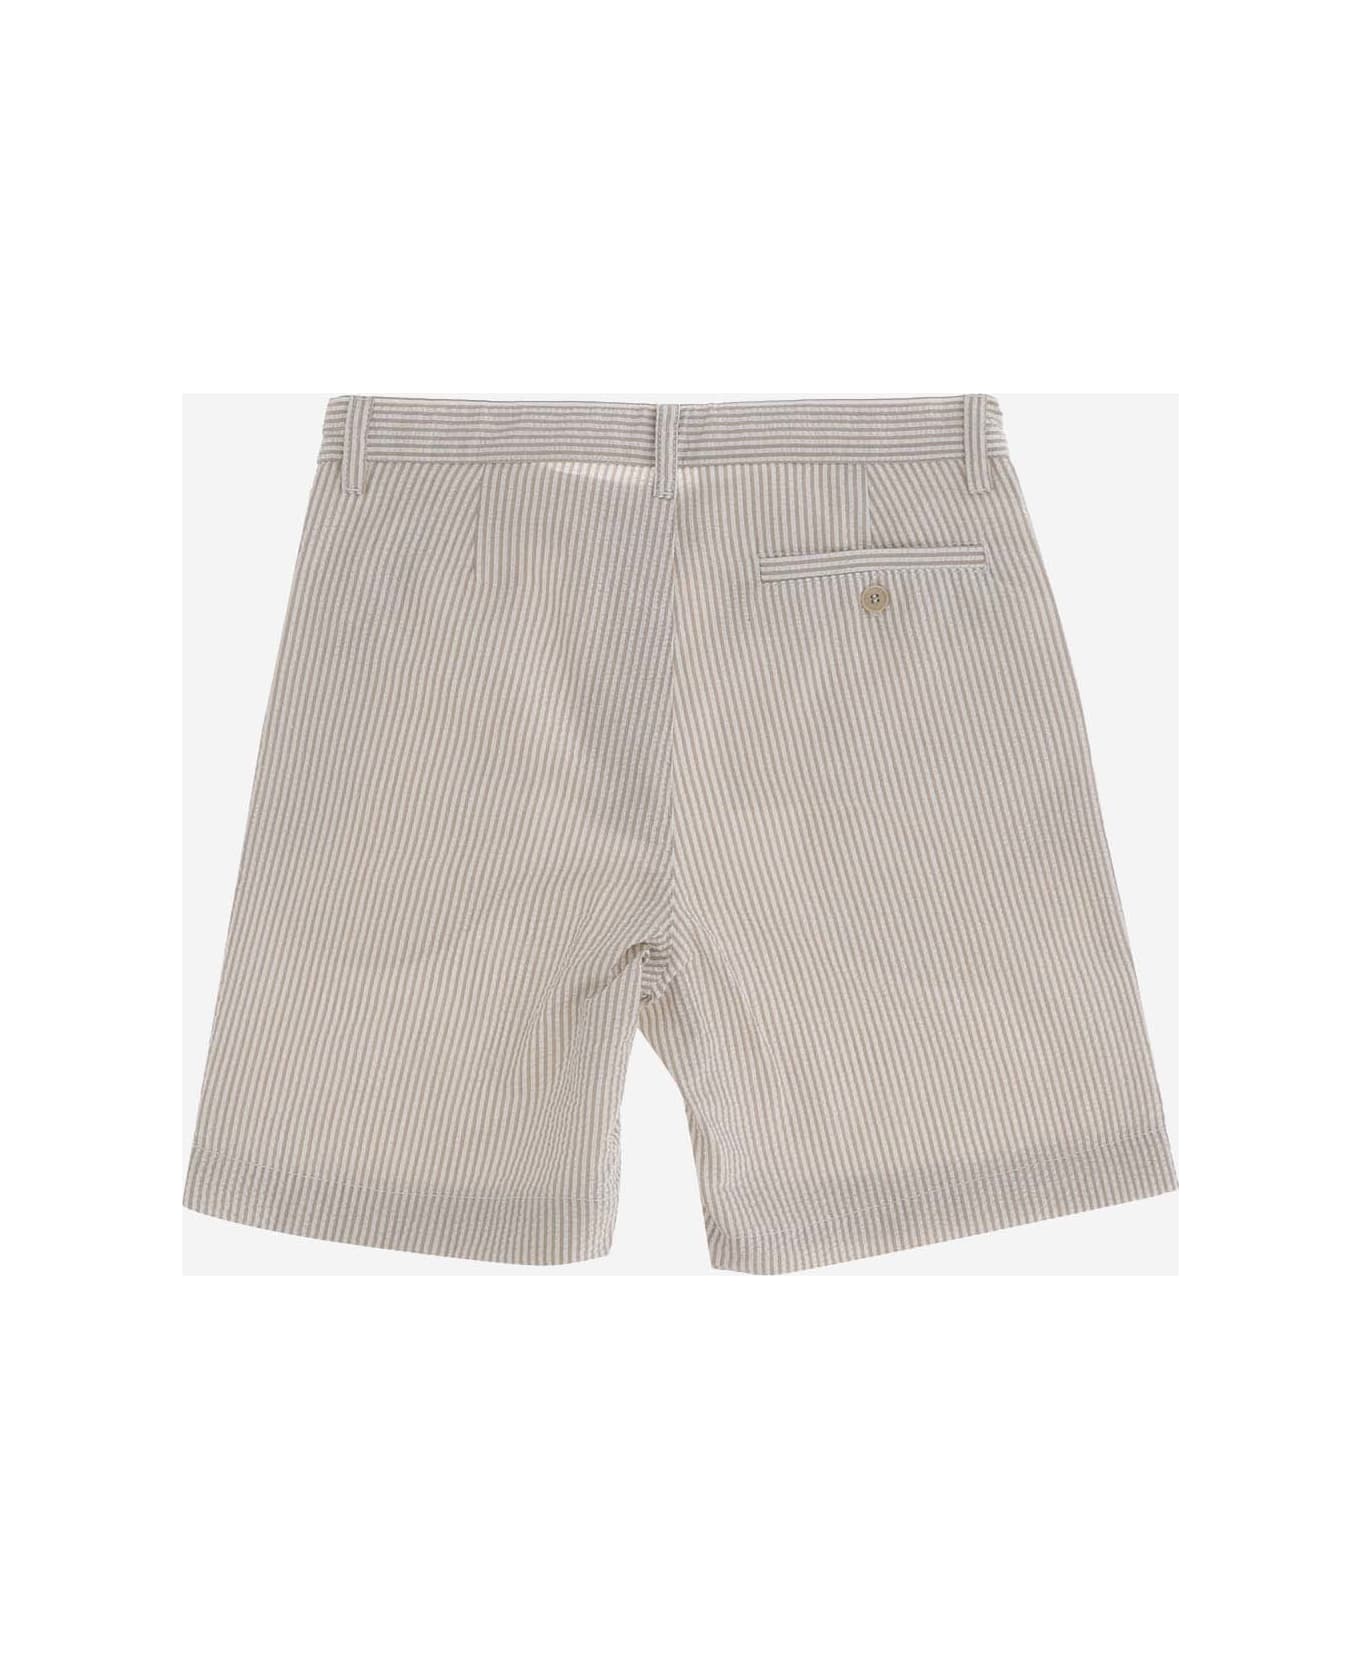 Il Gufo Cotton Short Pants With Striped Pattern - Beige